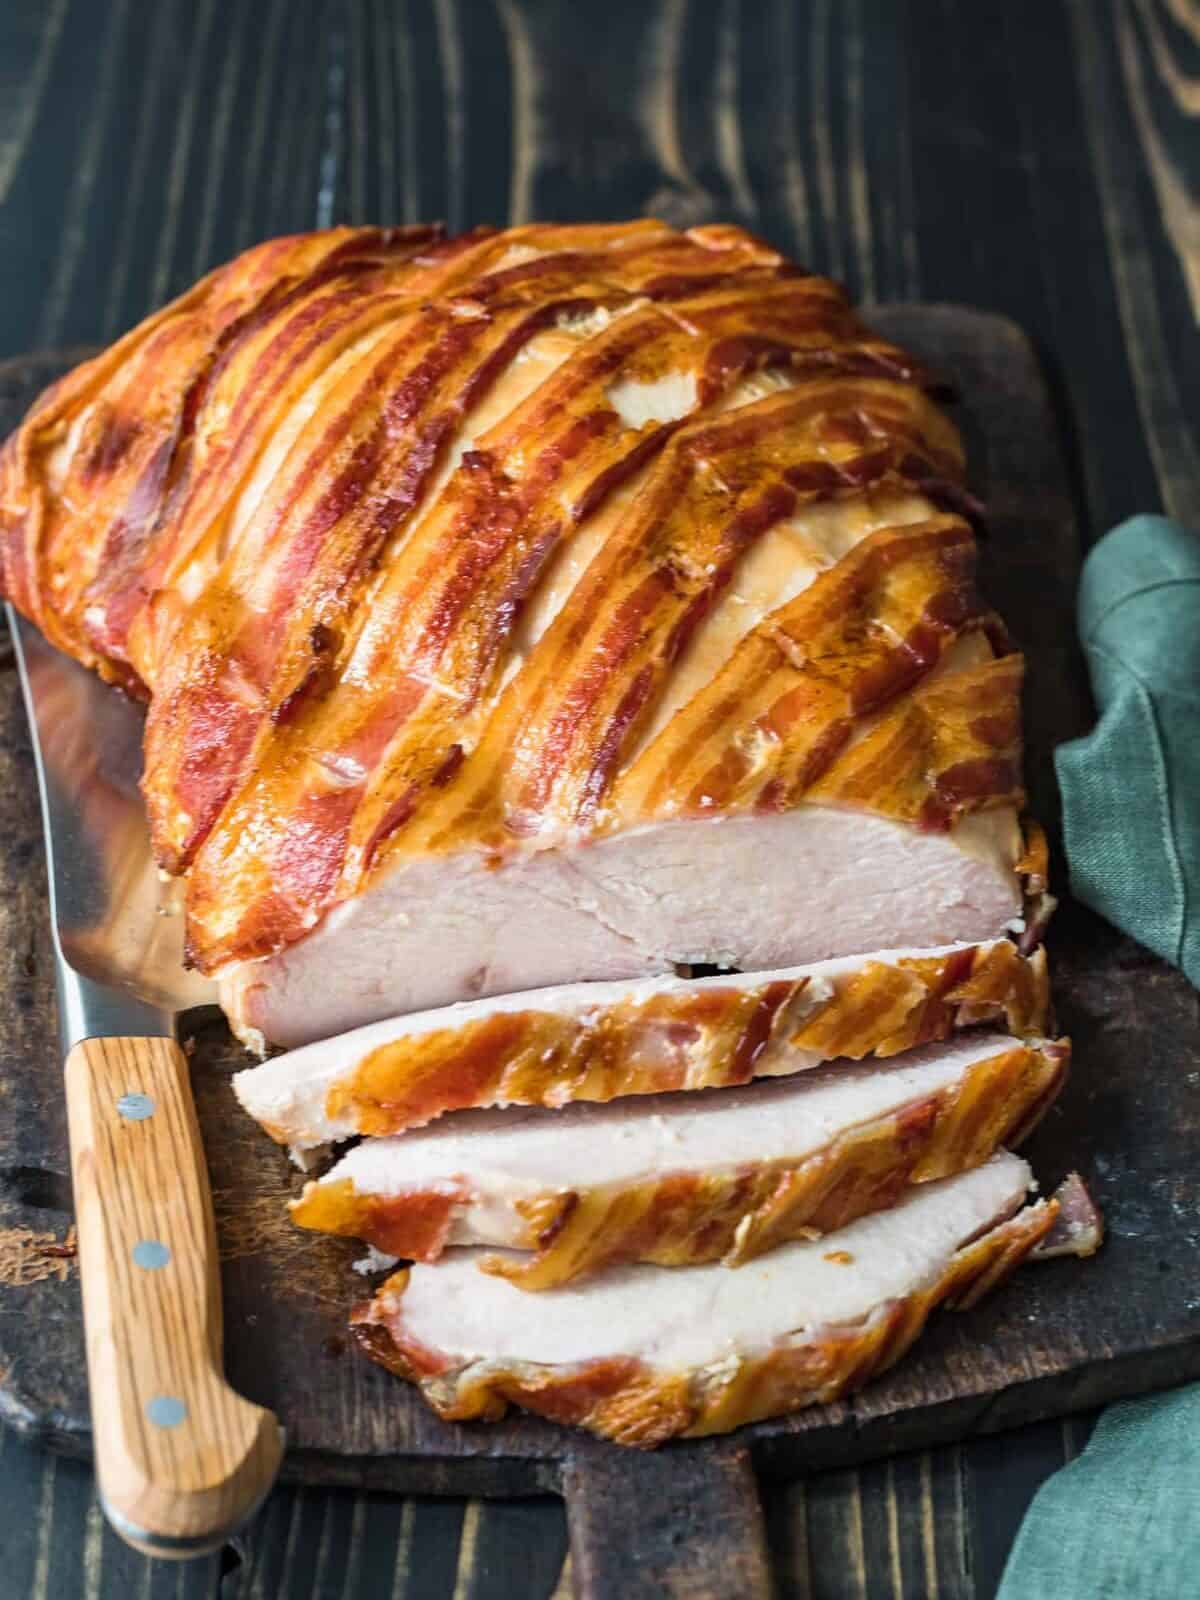 Bacon on Gordon Turkey for a Super Juicy Thanksgiving Meal.